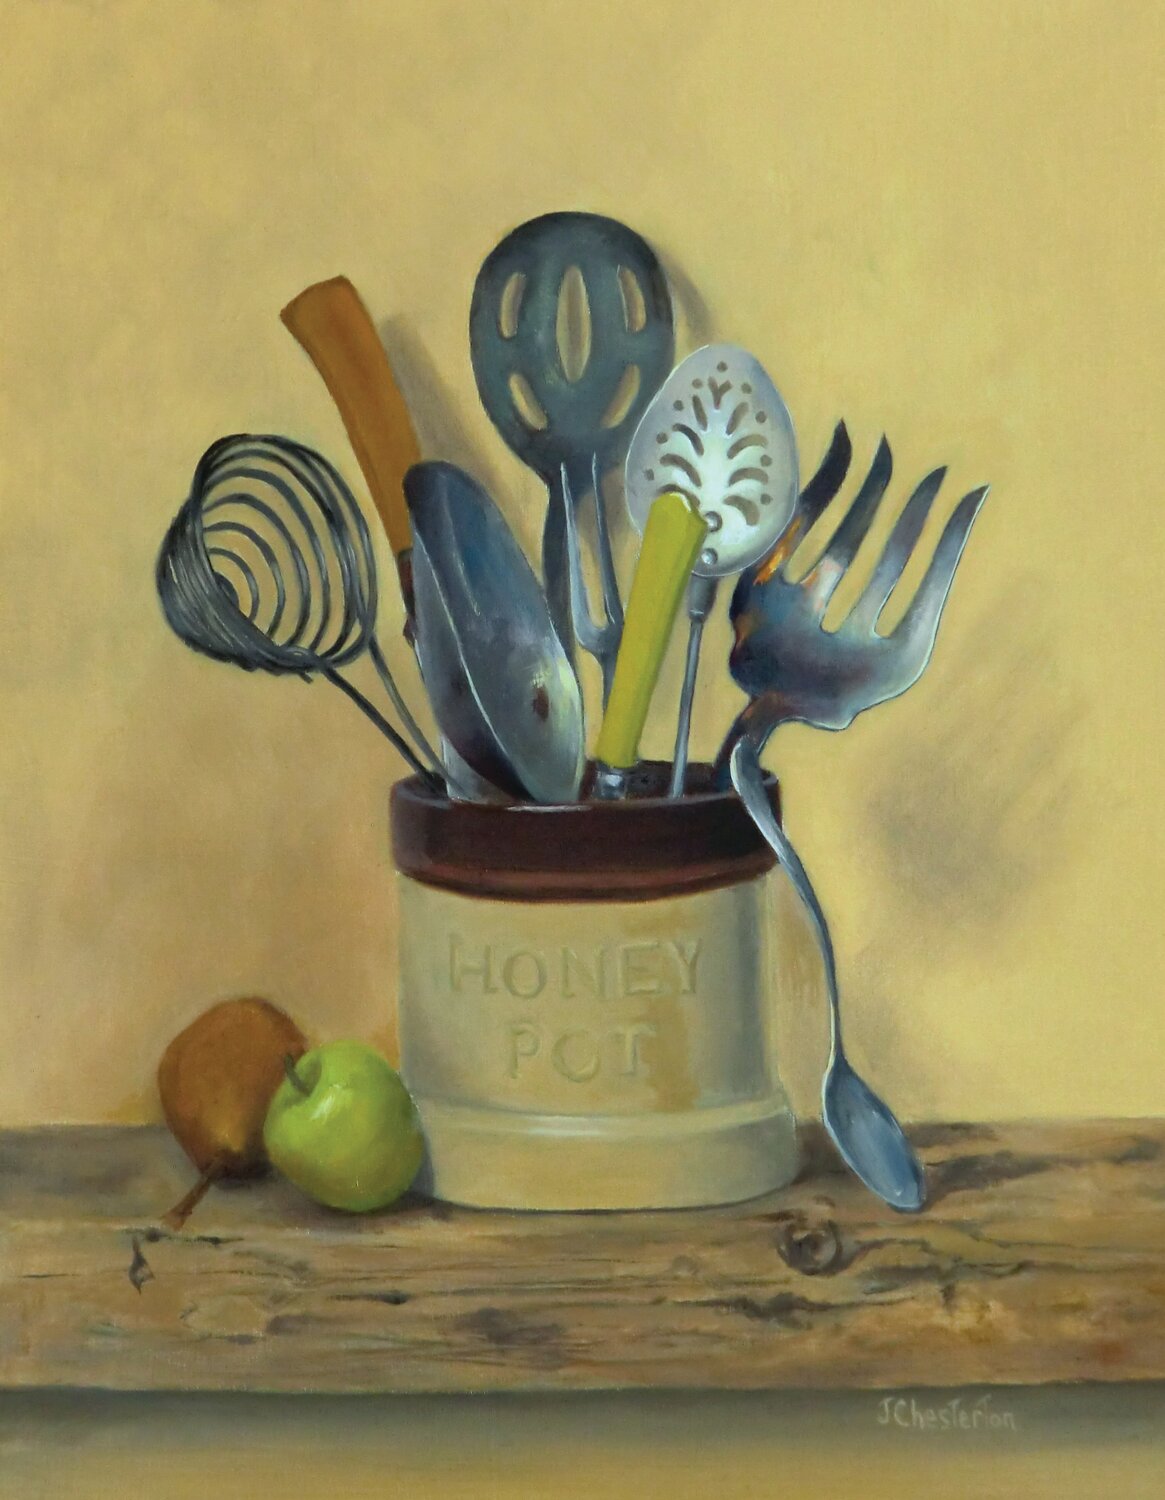 “Kitchen Bouquet” is an oil painting by Jeanne Chesterton.